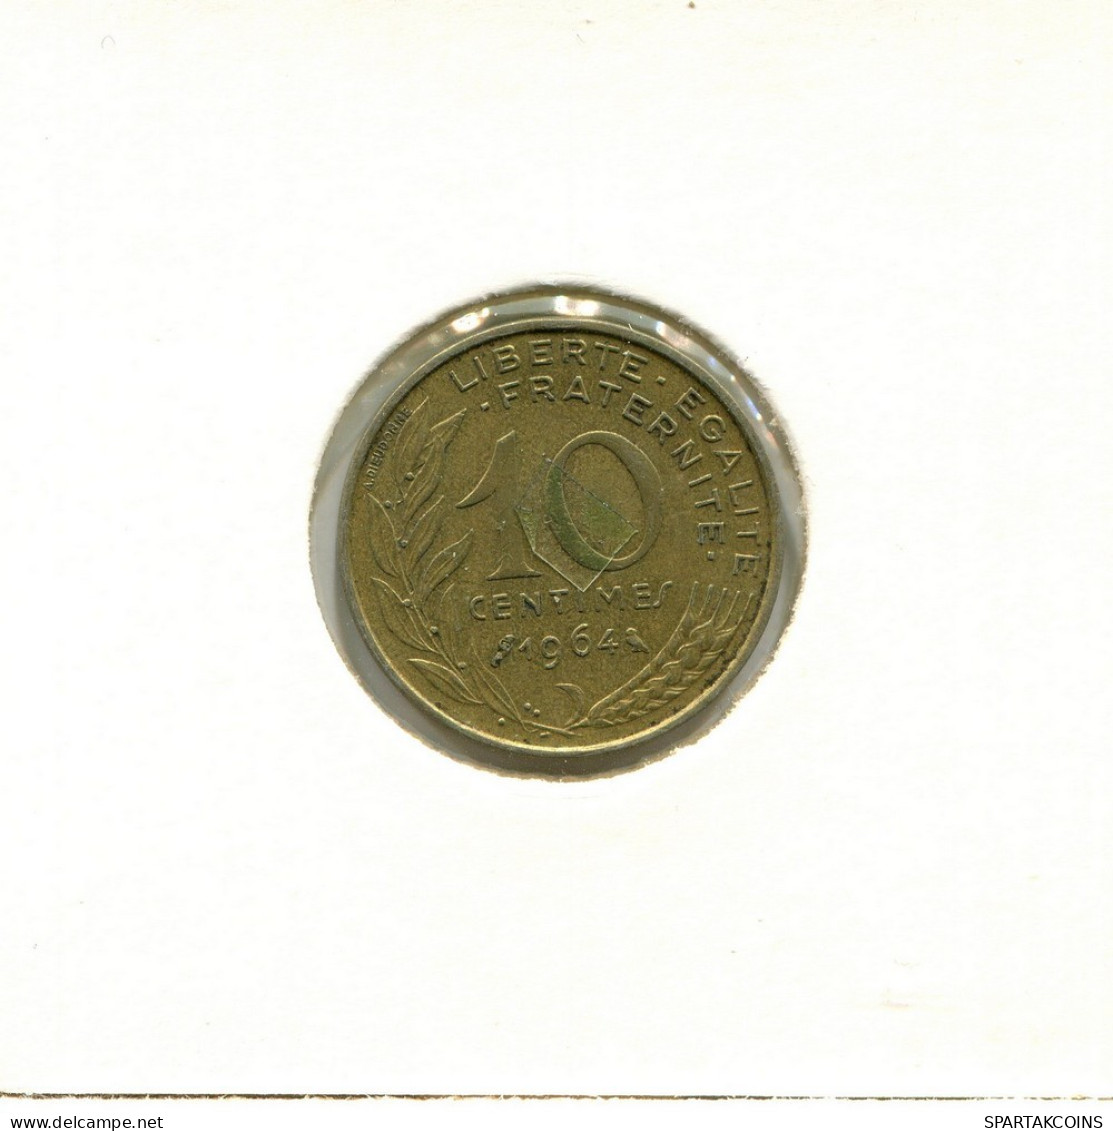 10 CENTIMES 1964 FRANCE Coin #BB442.U.A - 10 Centimes